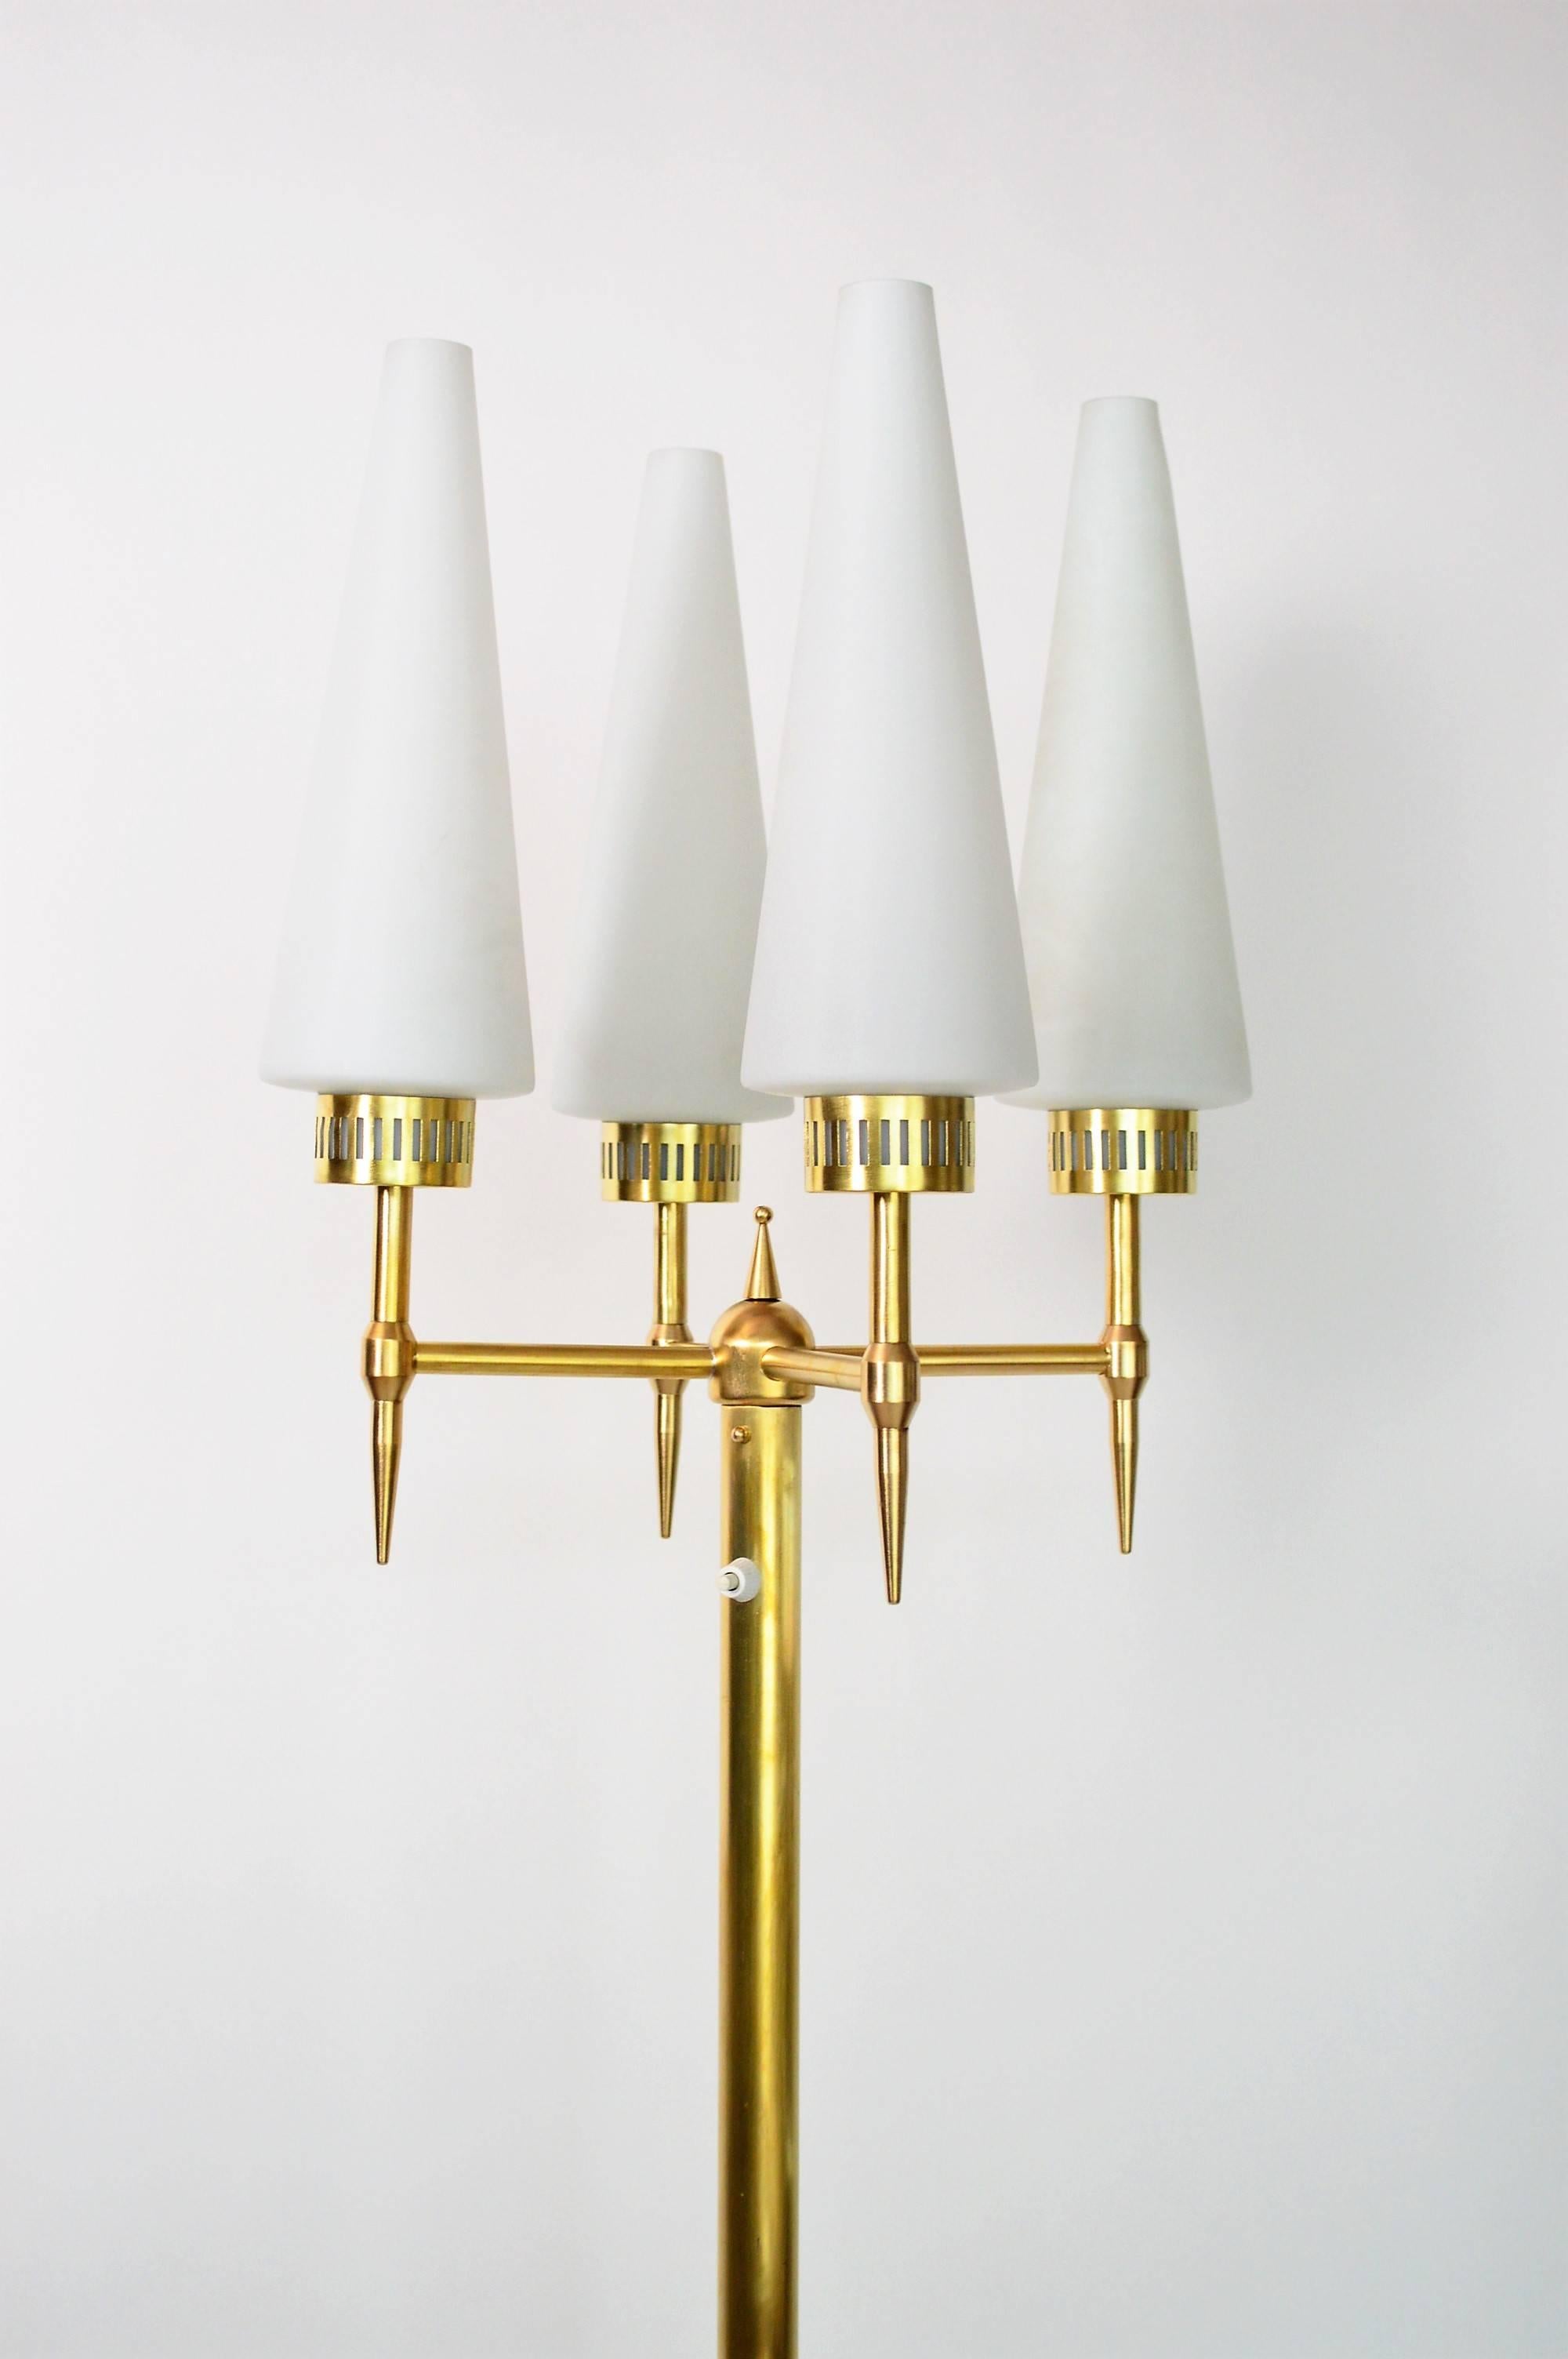 Gorgeous floor lamp with shiny brass lamp's base and details and four frosted glass shades.
All brass details have been polished and are very shiny as in original condition, the four glasses are in mint condition. The original on/off switch works